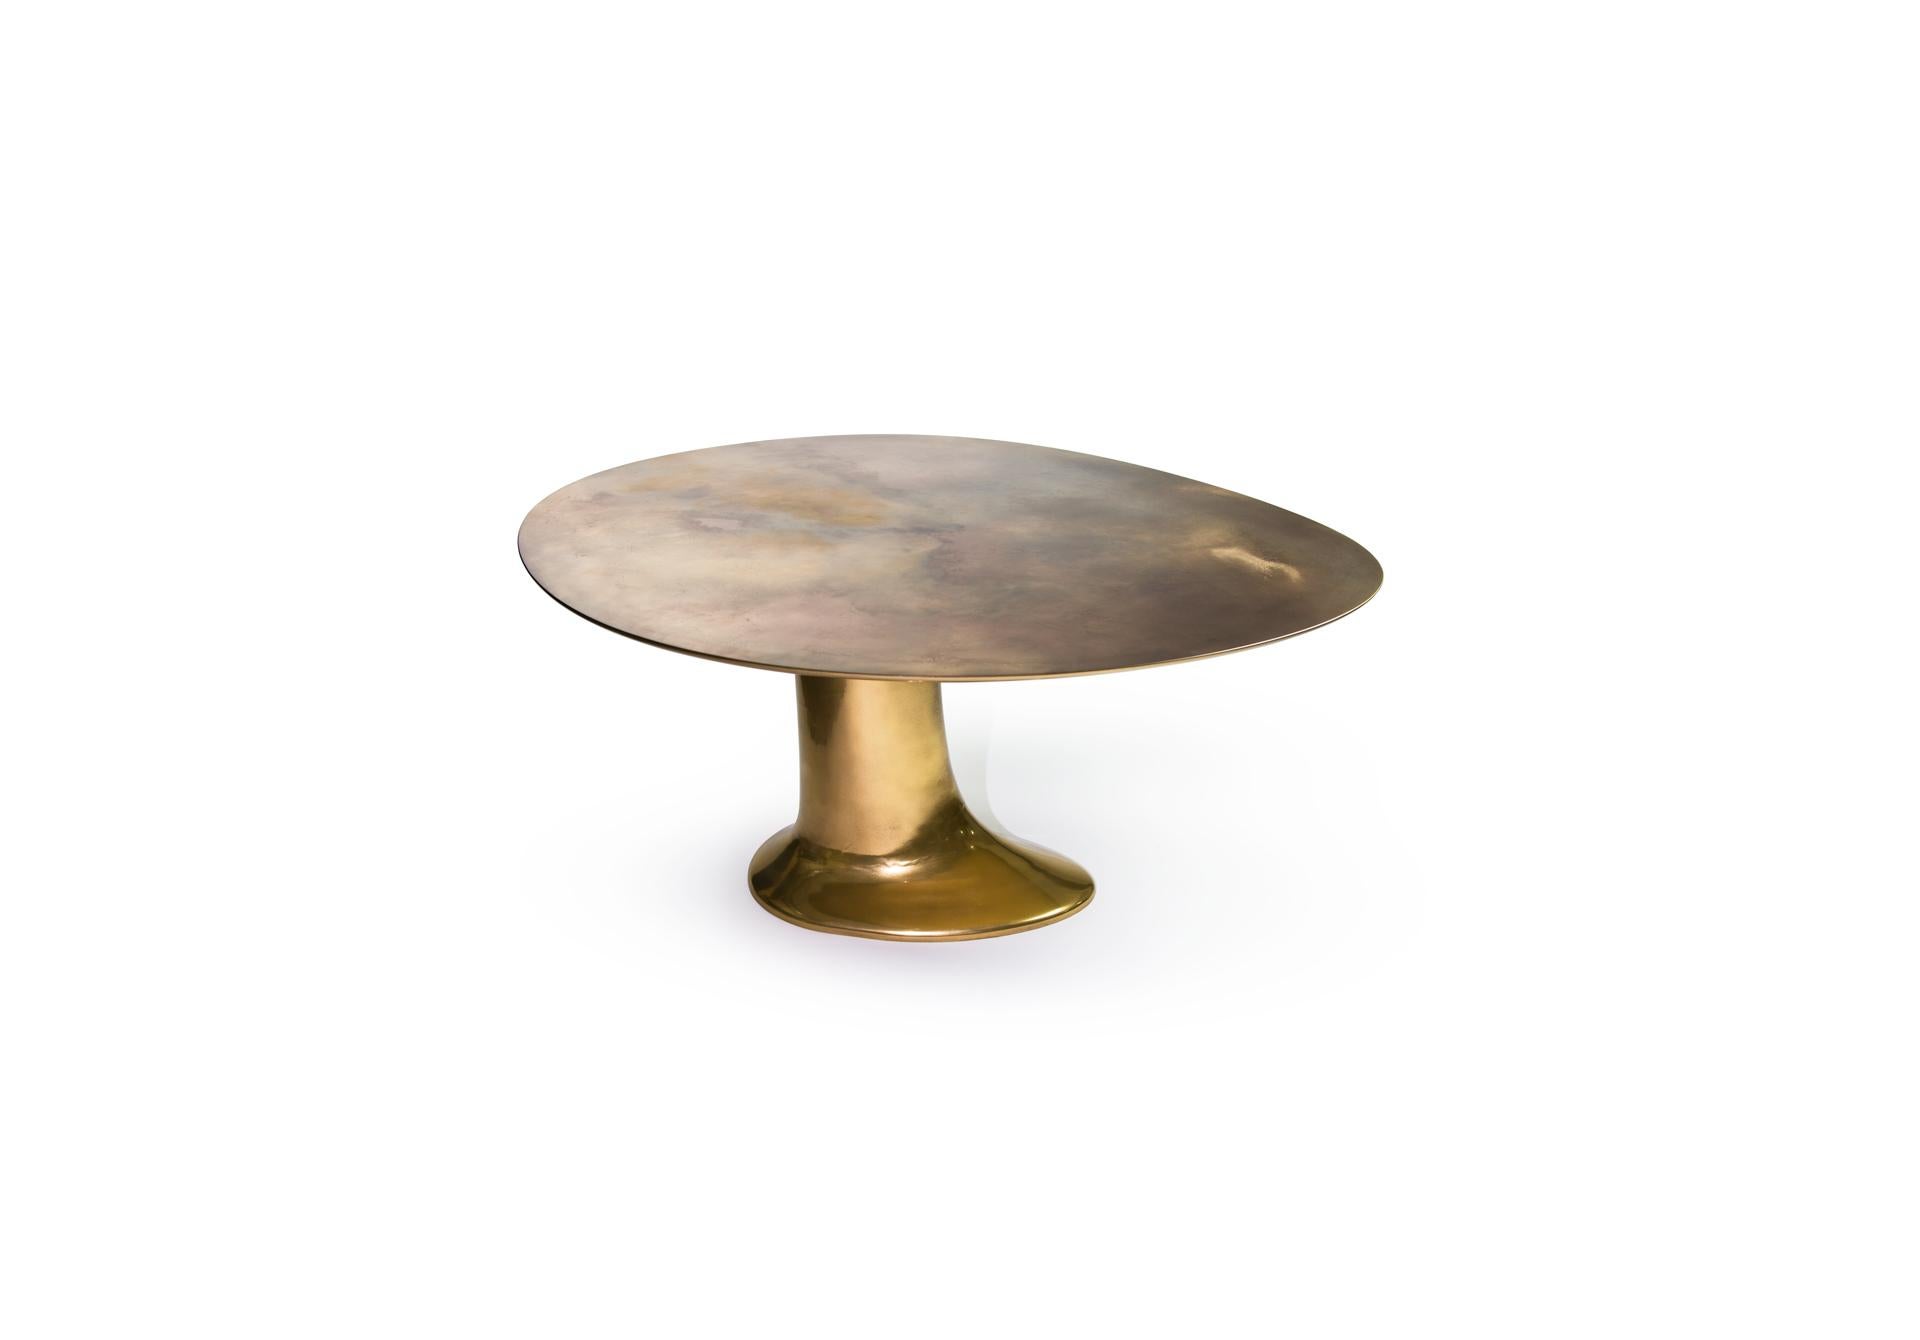 Modern Minimalist sculptural sophisticated. Designed and produced in Europe, this is a hand-sculpted and finished design piece; a chic dining room table with a liquid metal molded asymmetric pedestal and ellipse structure and bronze powdered resin